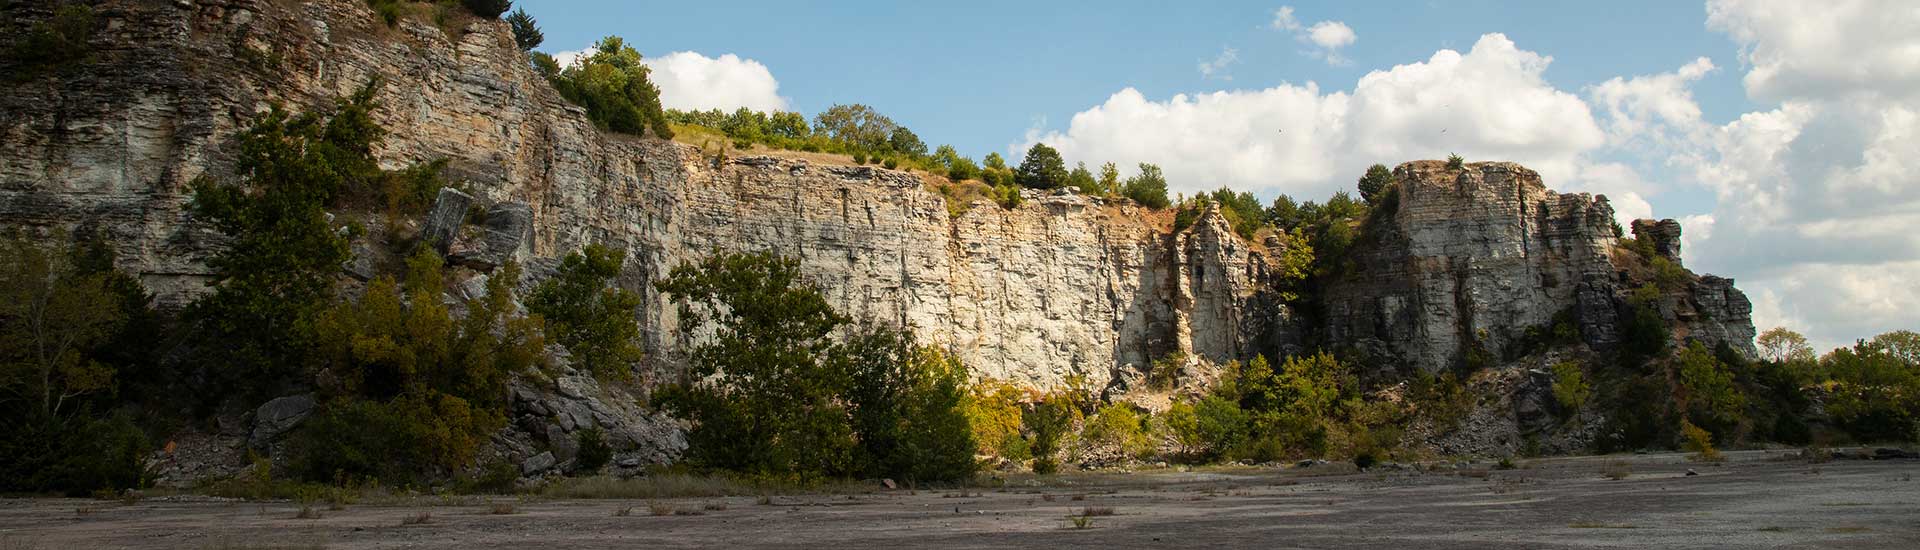 Looking up at the cliff face of Table Rock from the shoreline of Table Rock Lake, Branson, MO.